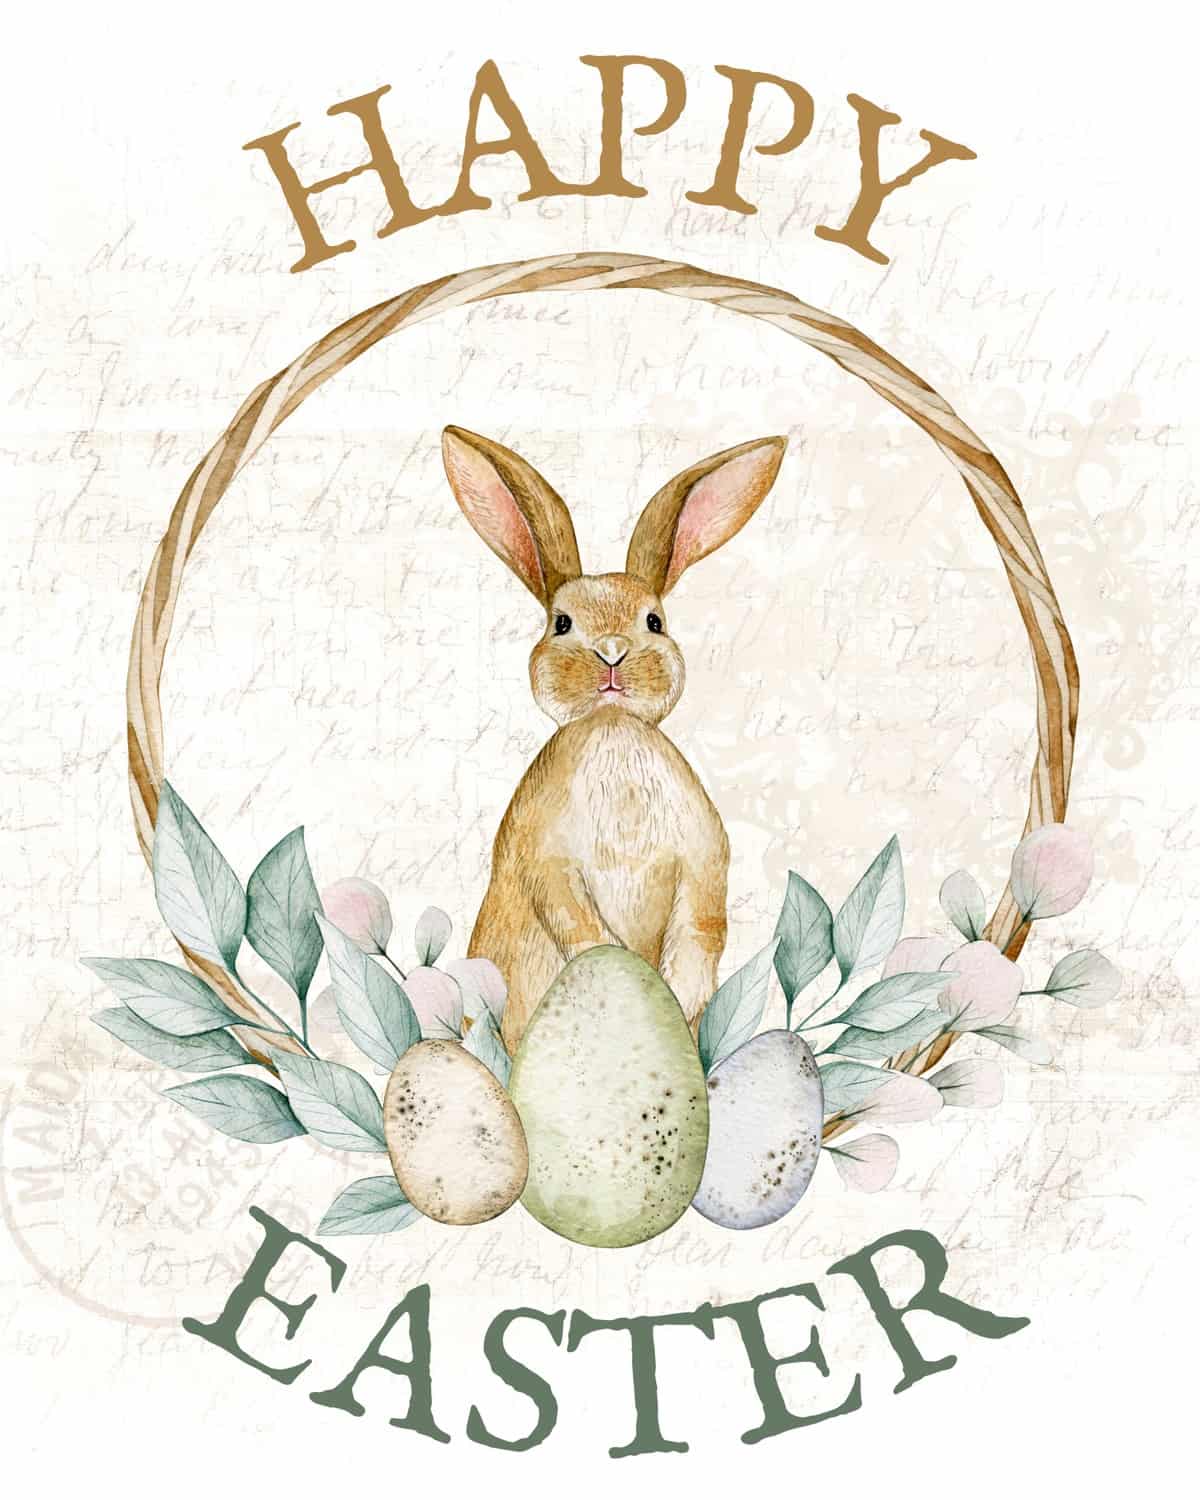 15 Free Easter Printables to Decorate Your Home - Prudent Penny Pincher